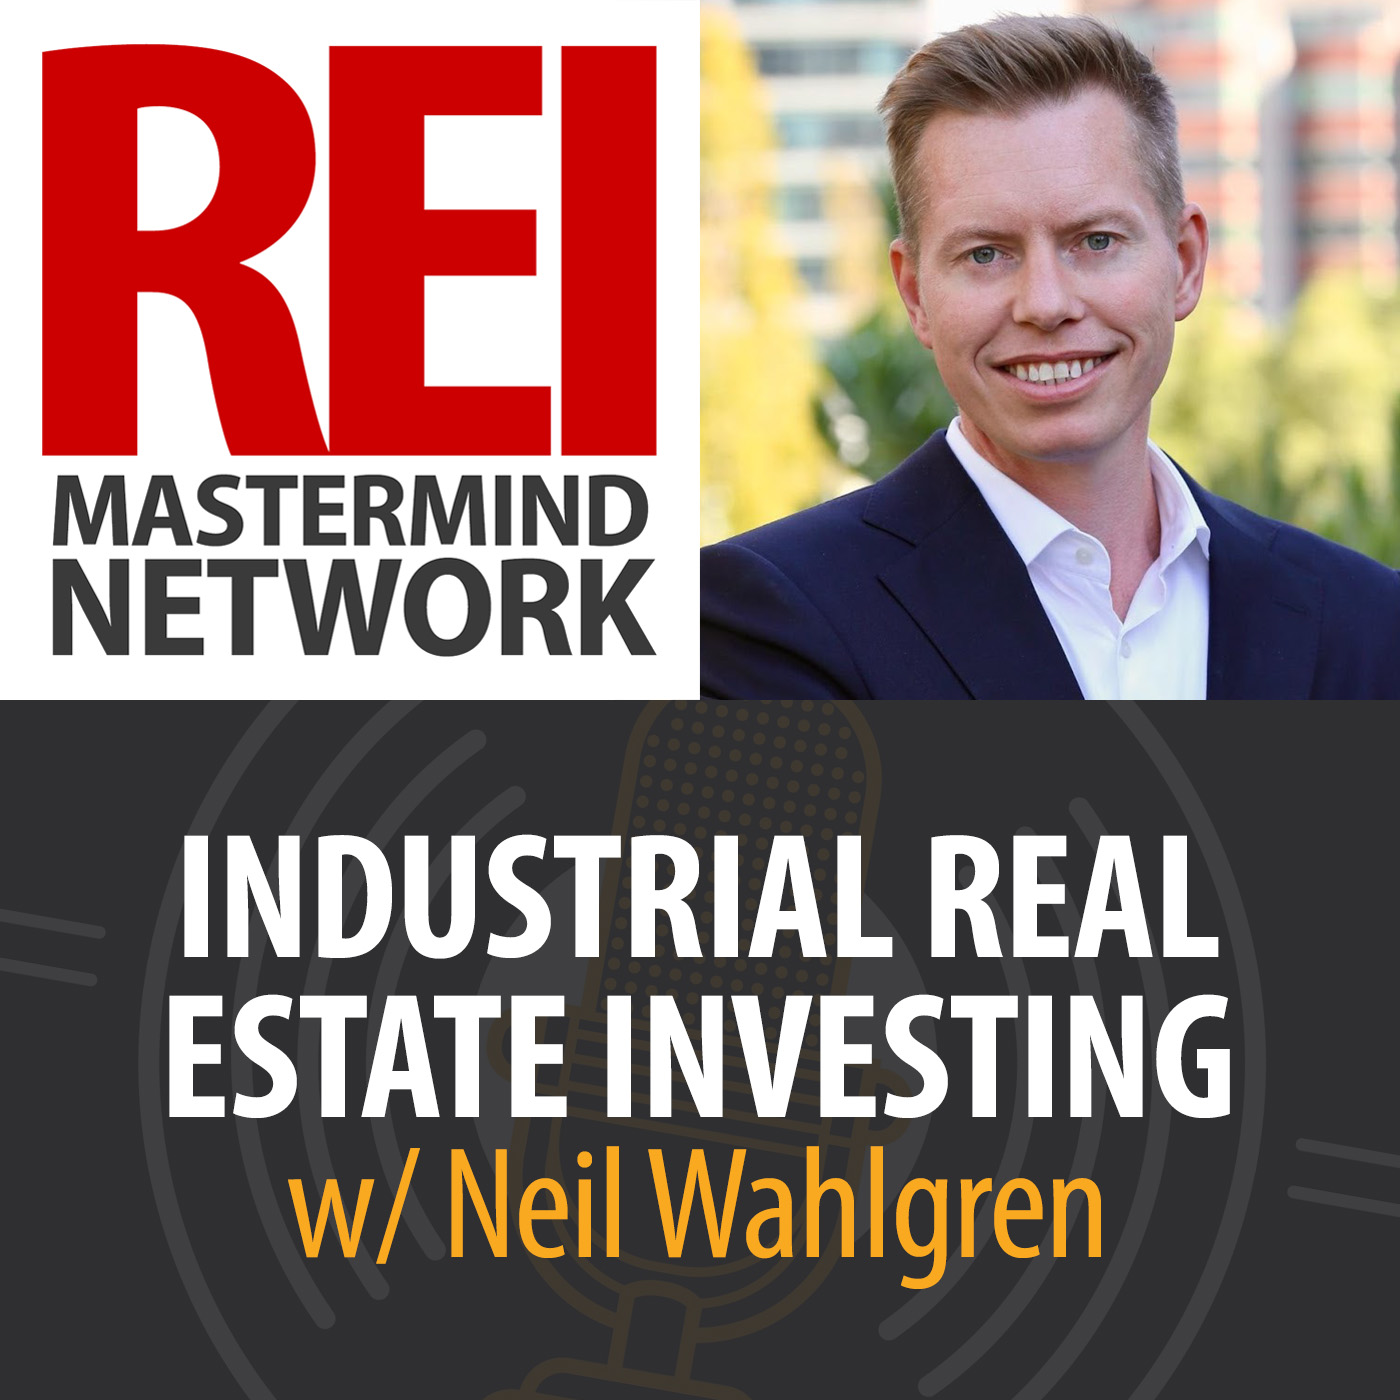 Industrial Real Estate Investing with Neil Wahlgren Image